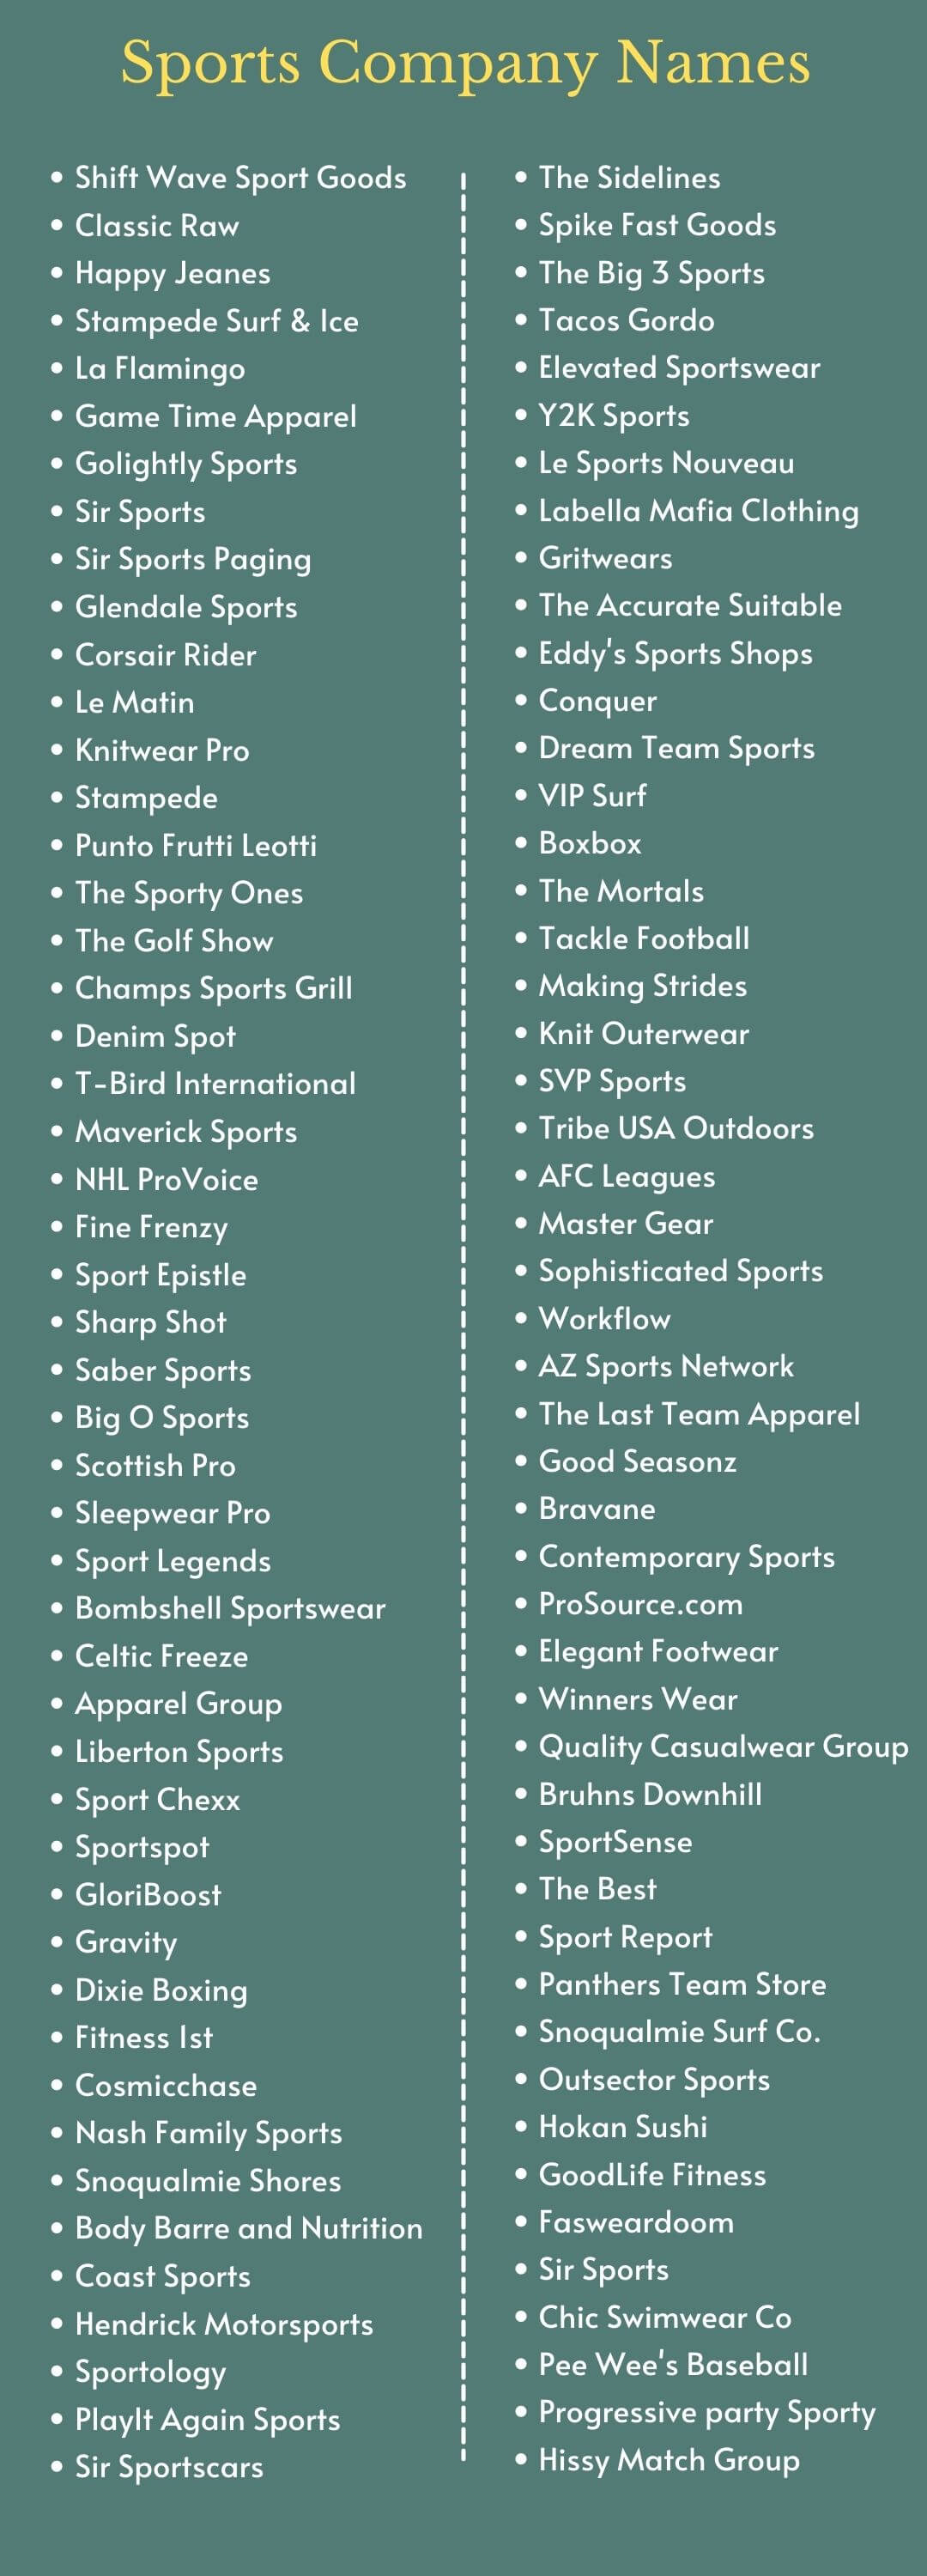 Sports Company Names: infographic